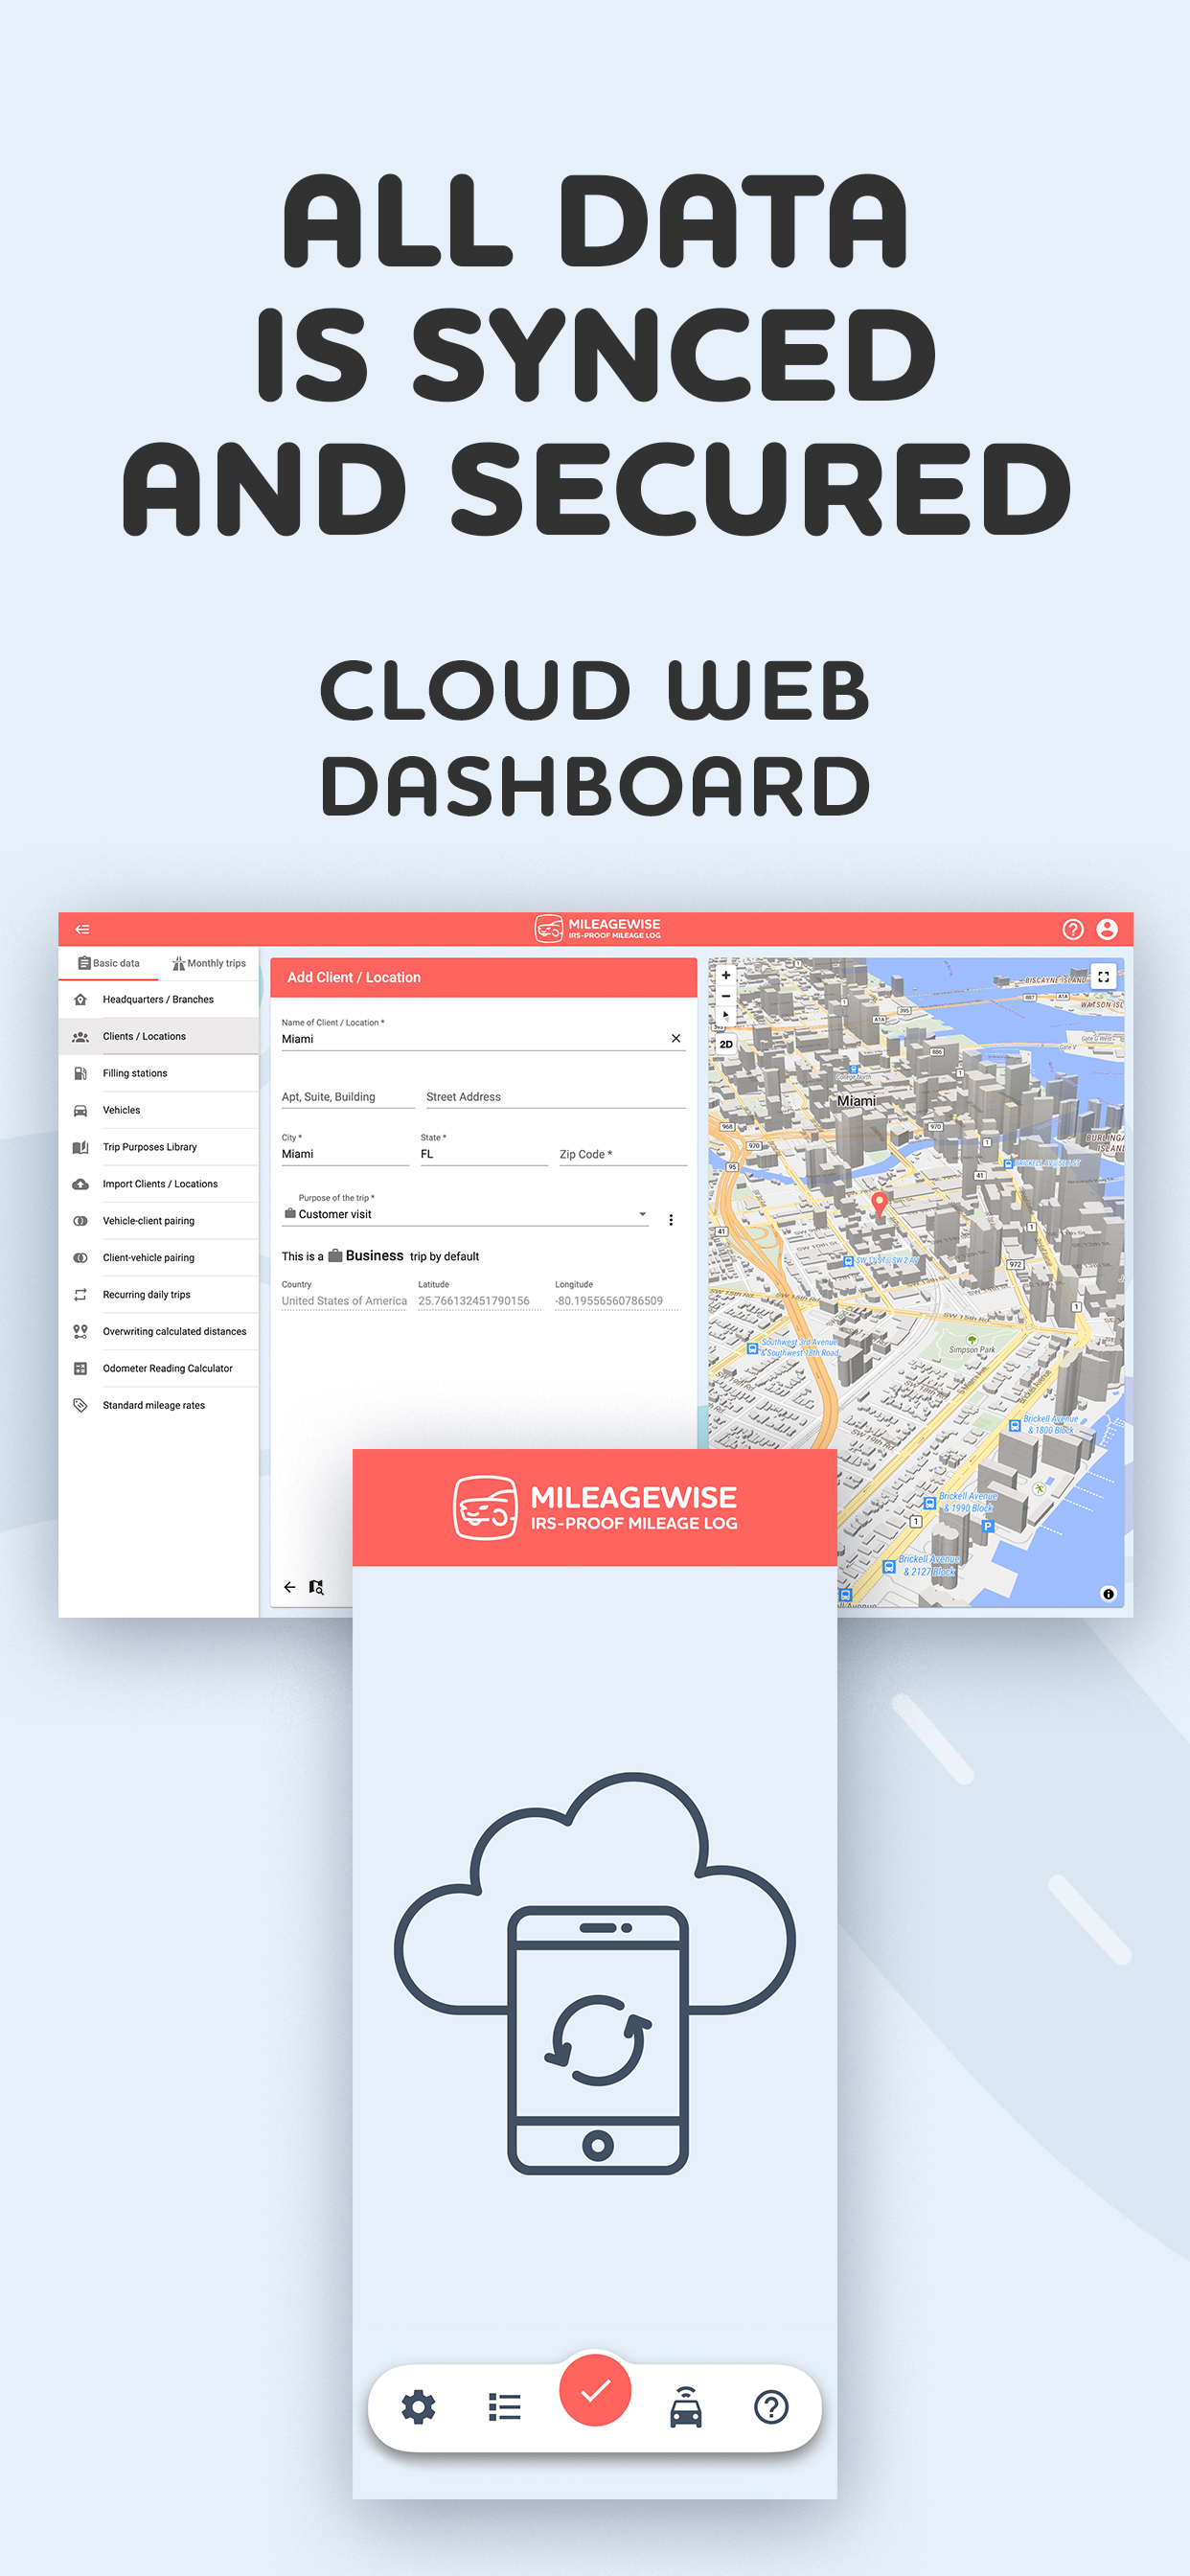 All Data is Synced & Secured in the Cloud of MileageWise's Web Dashboard